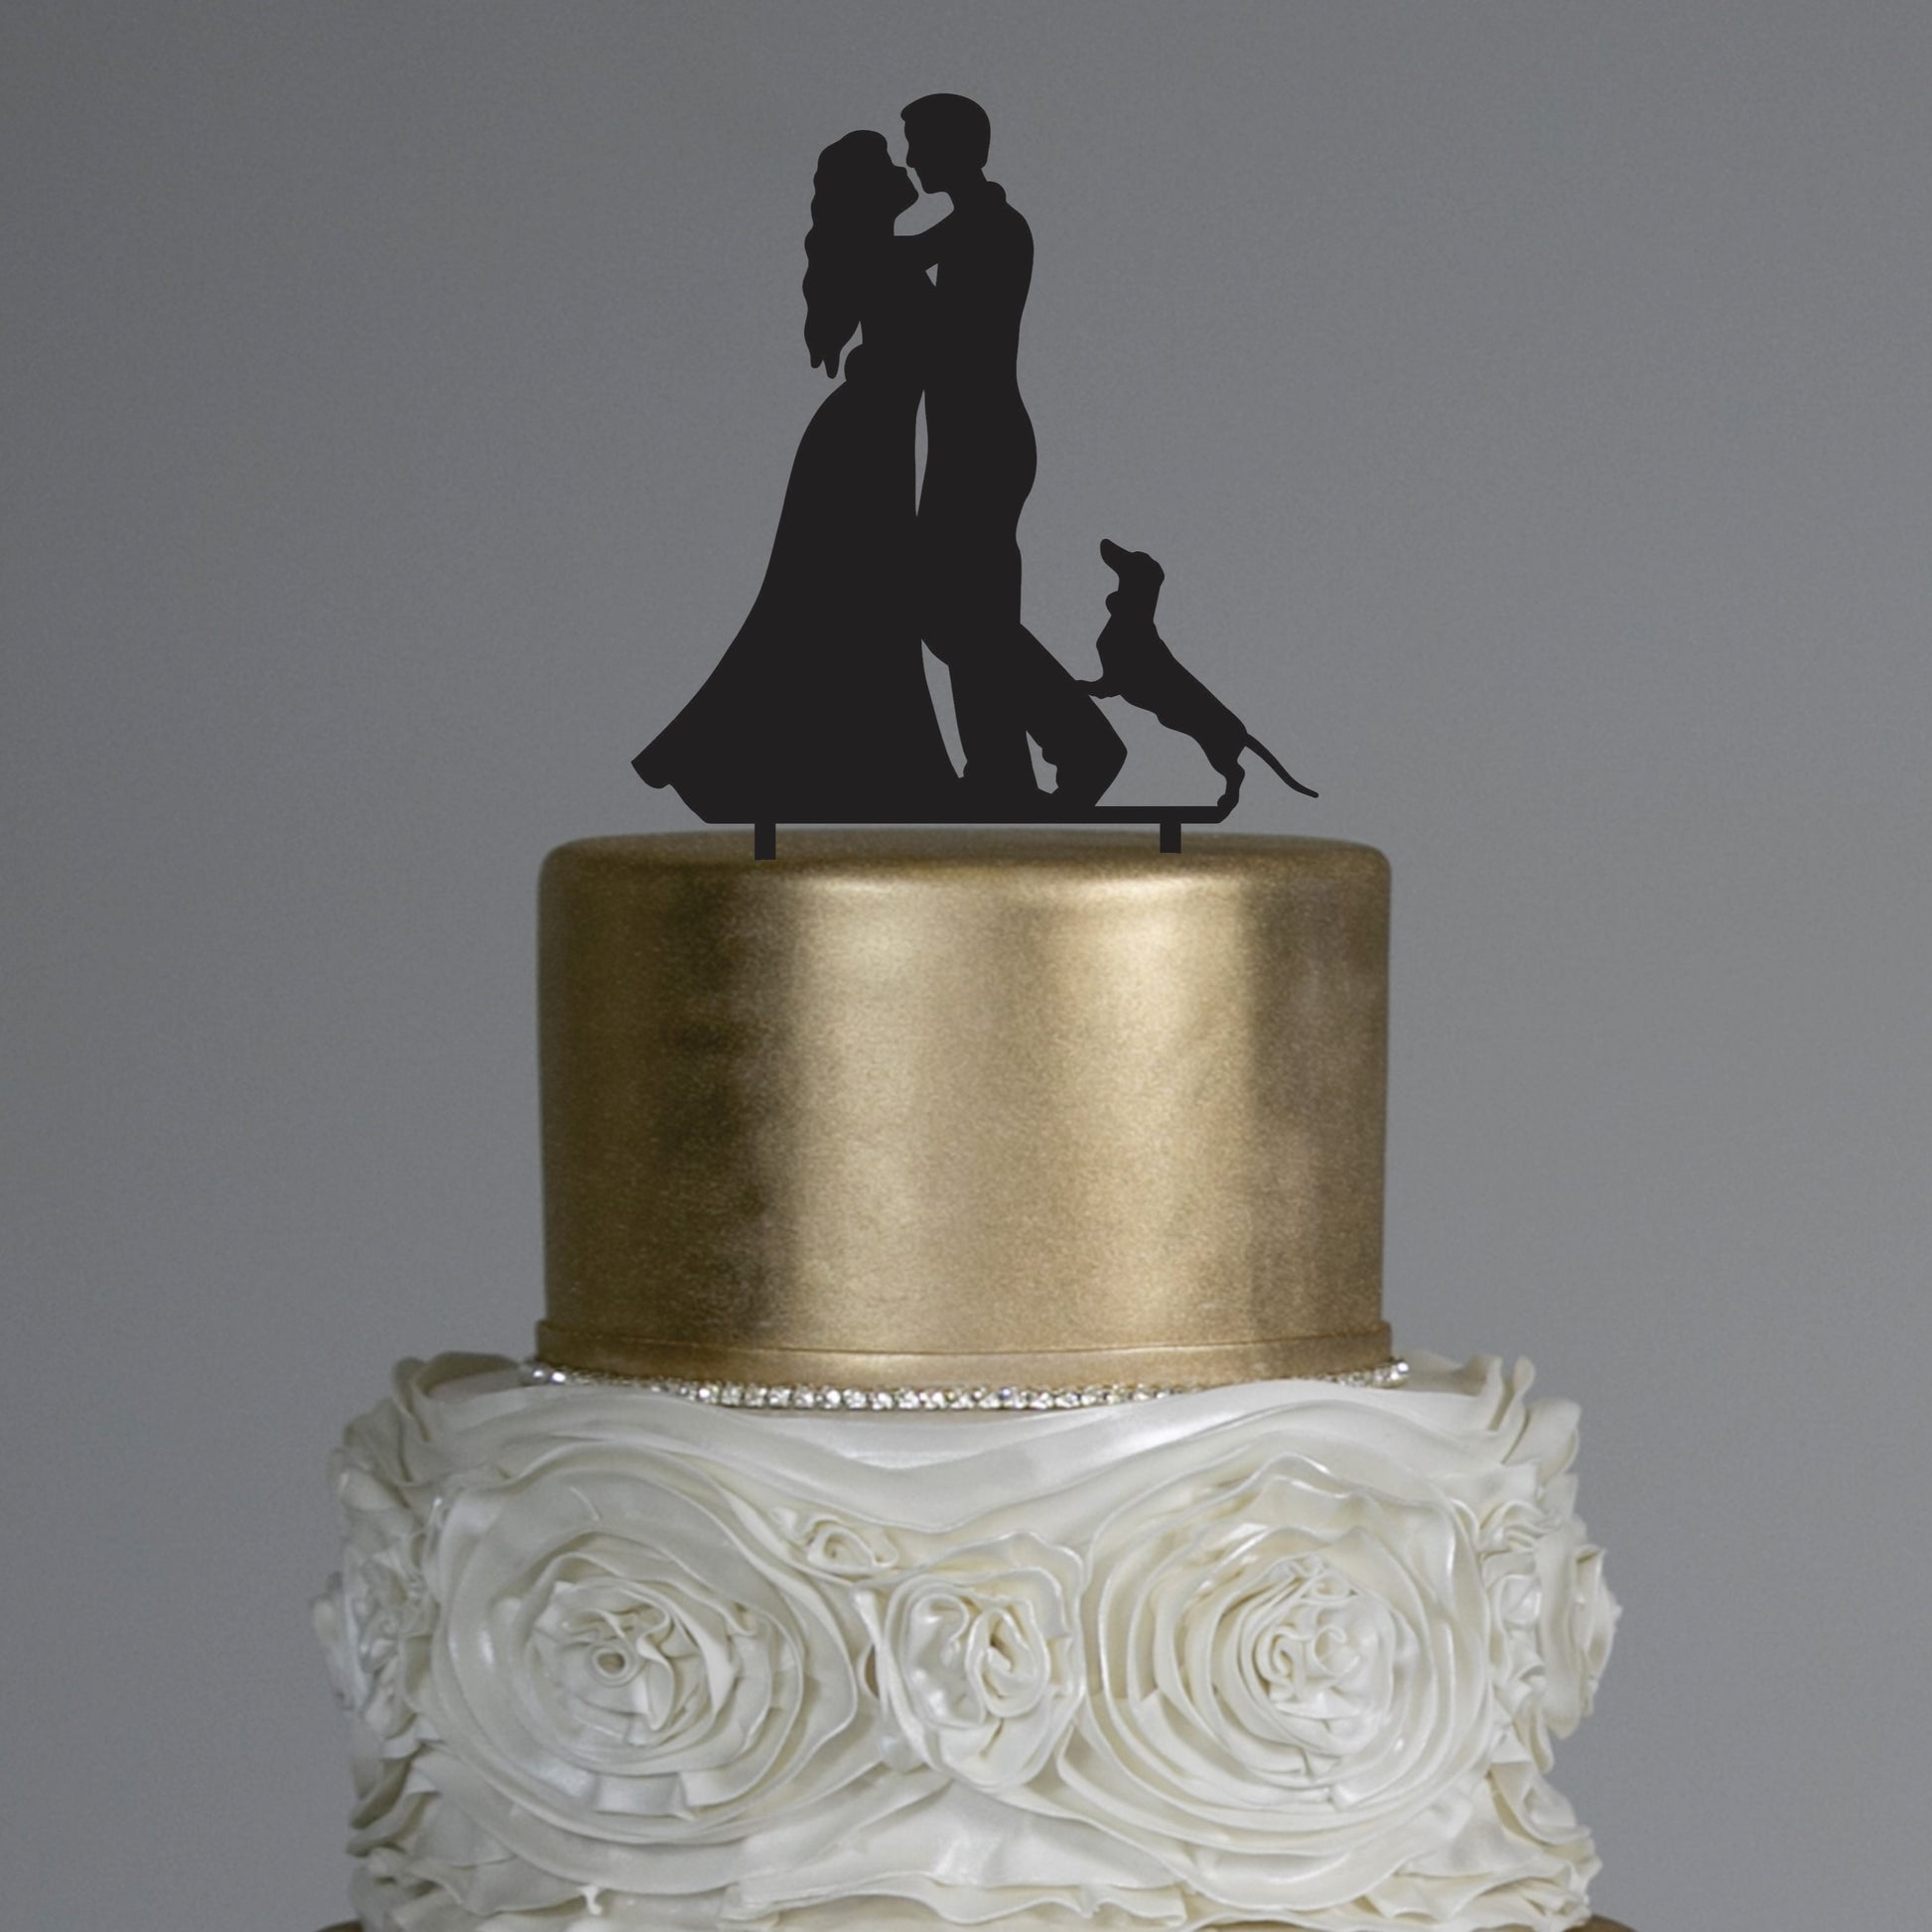 Silhouette cake topper featuring bridal couple and sausage dog